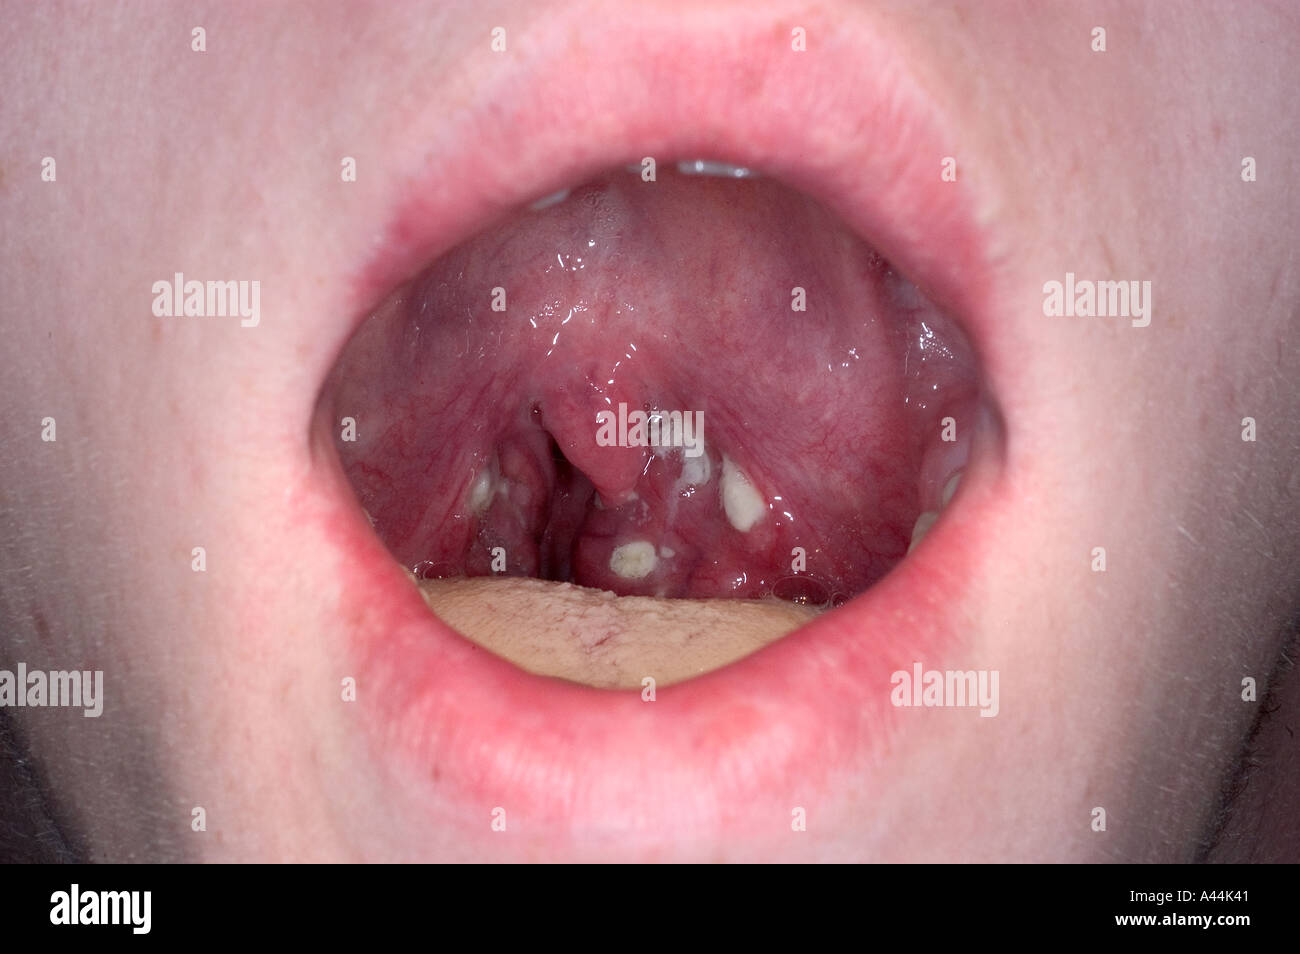 images Strep adults throat